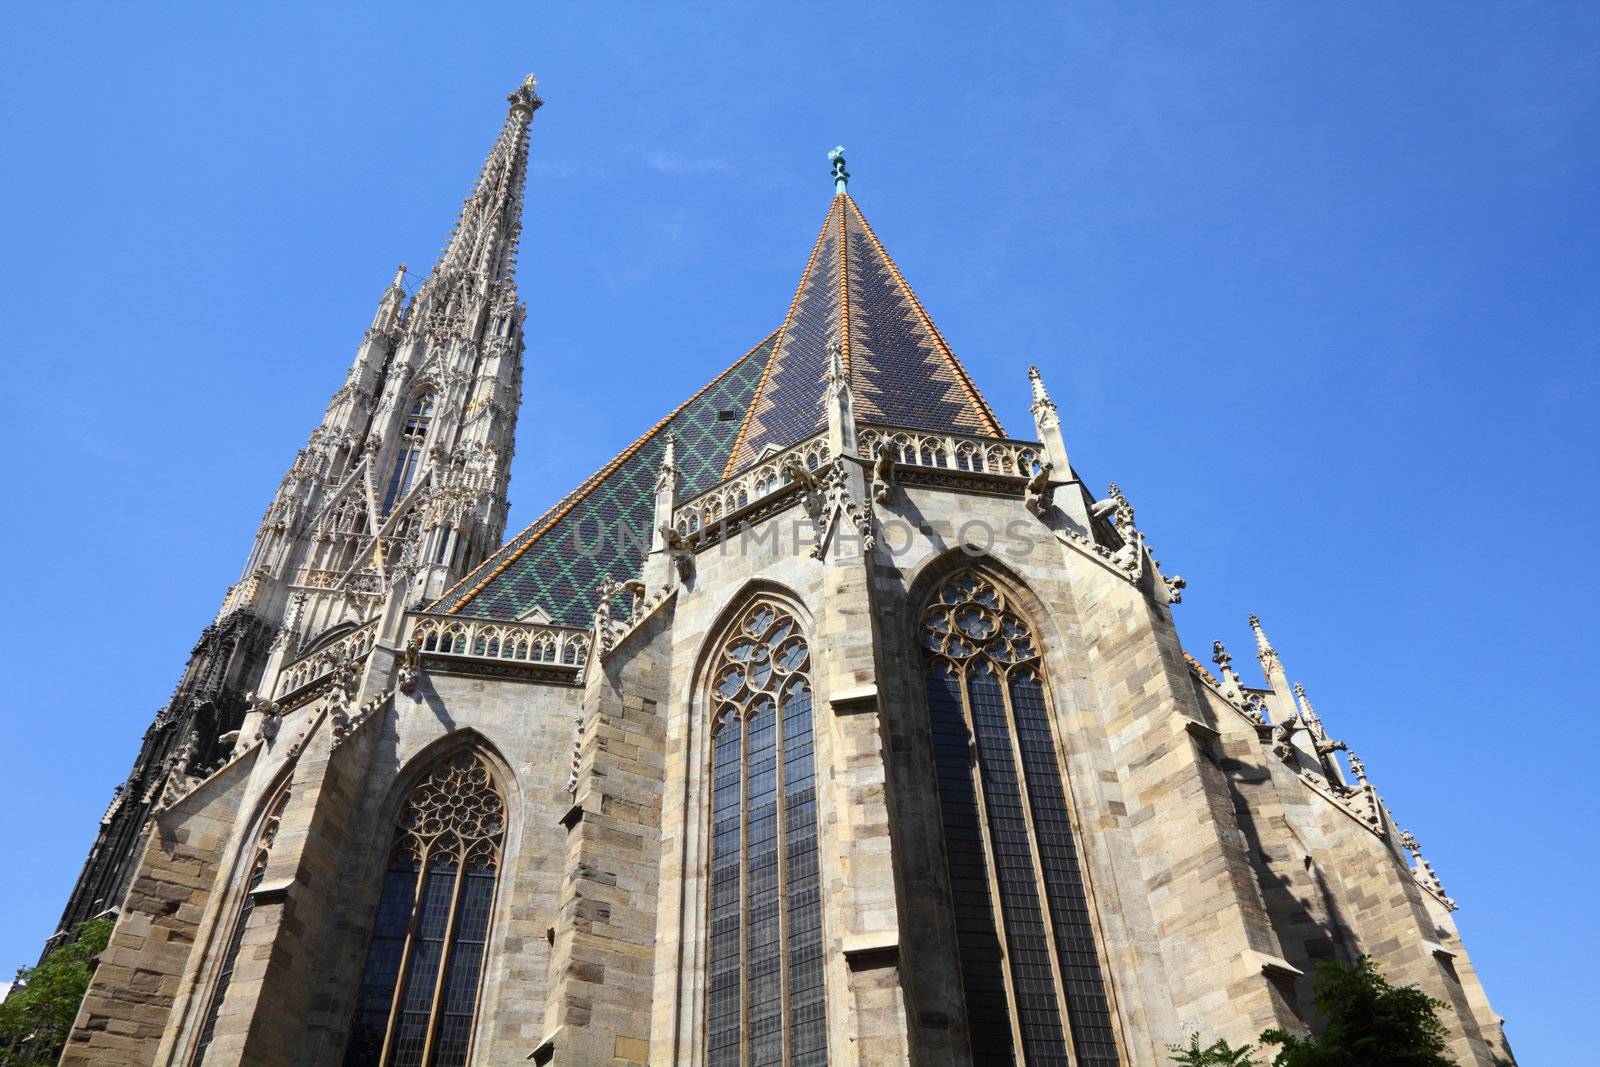 Vienna, Austria - famous Stephansdom (Saint Stephen's Cathedral). The Old Town is a UNESCO World Heritage Site.